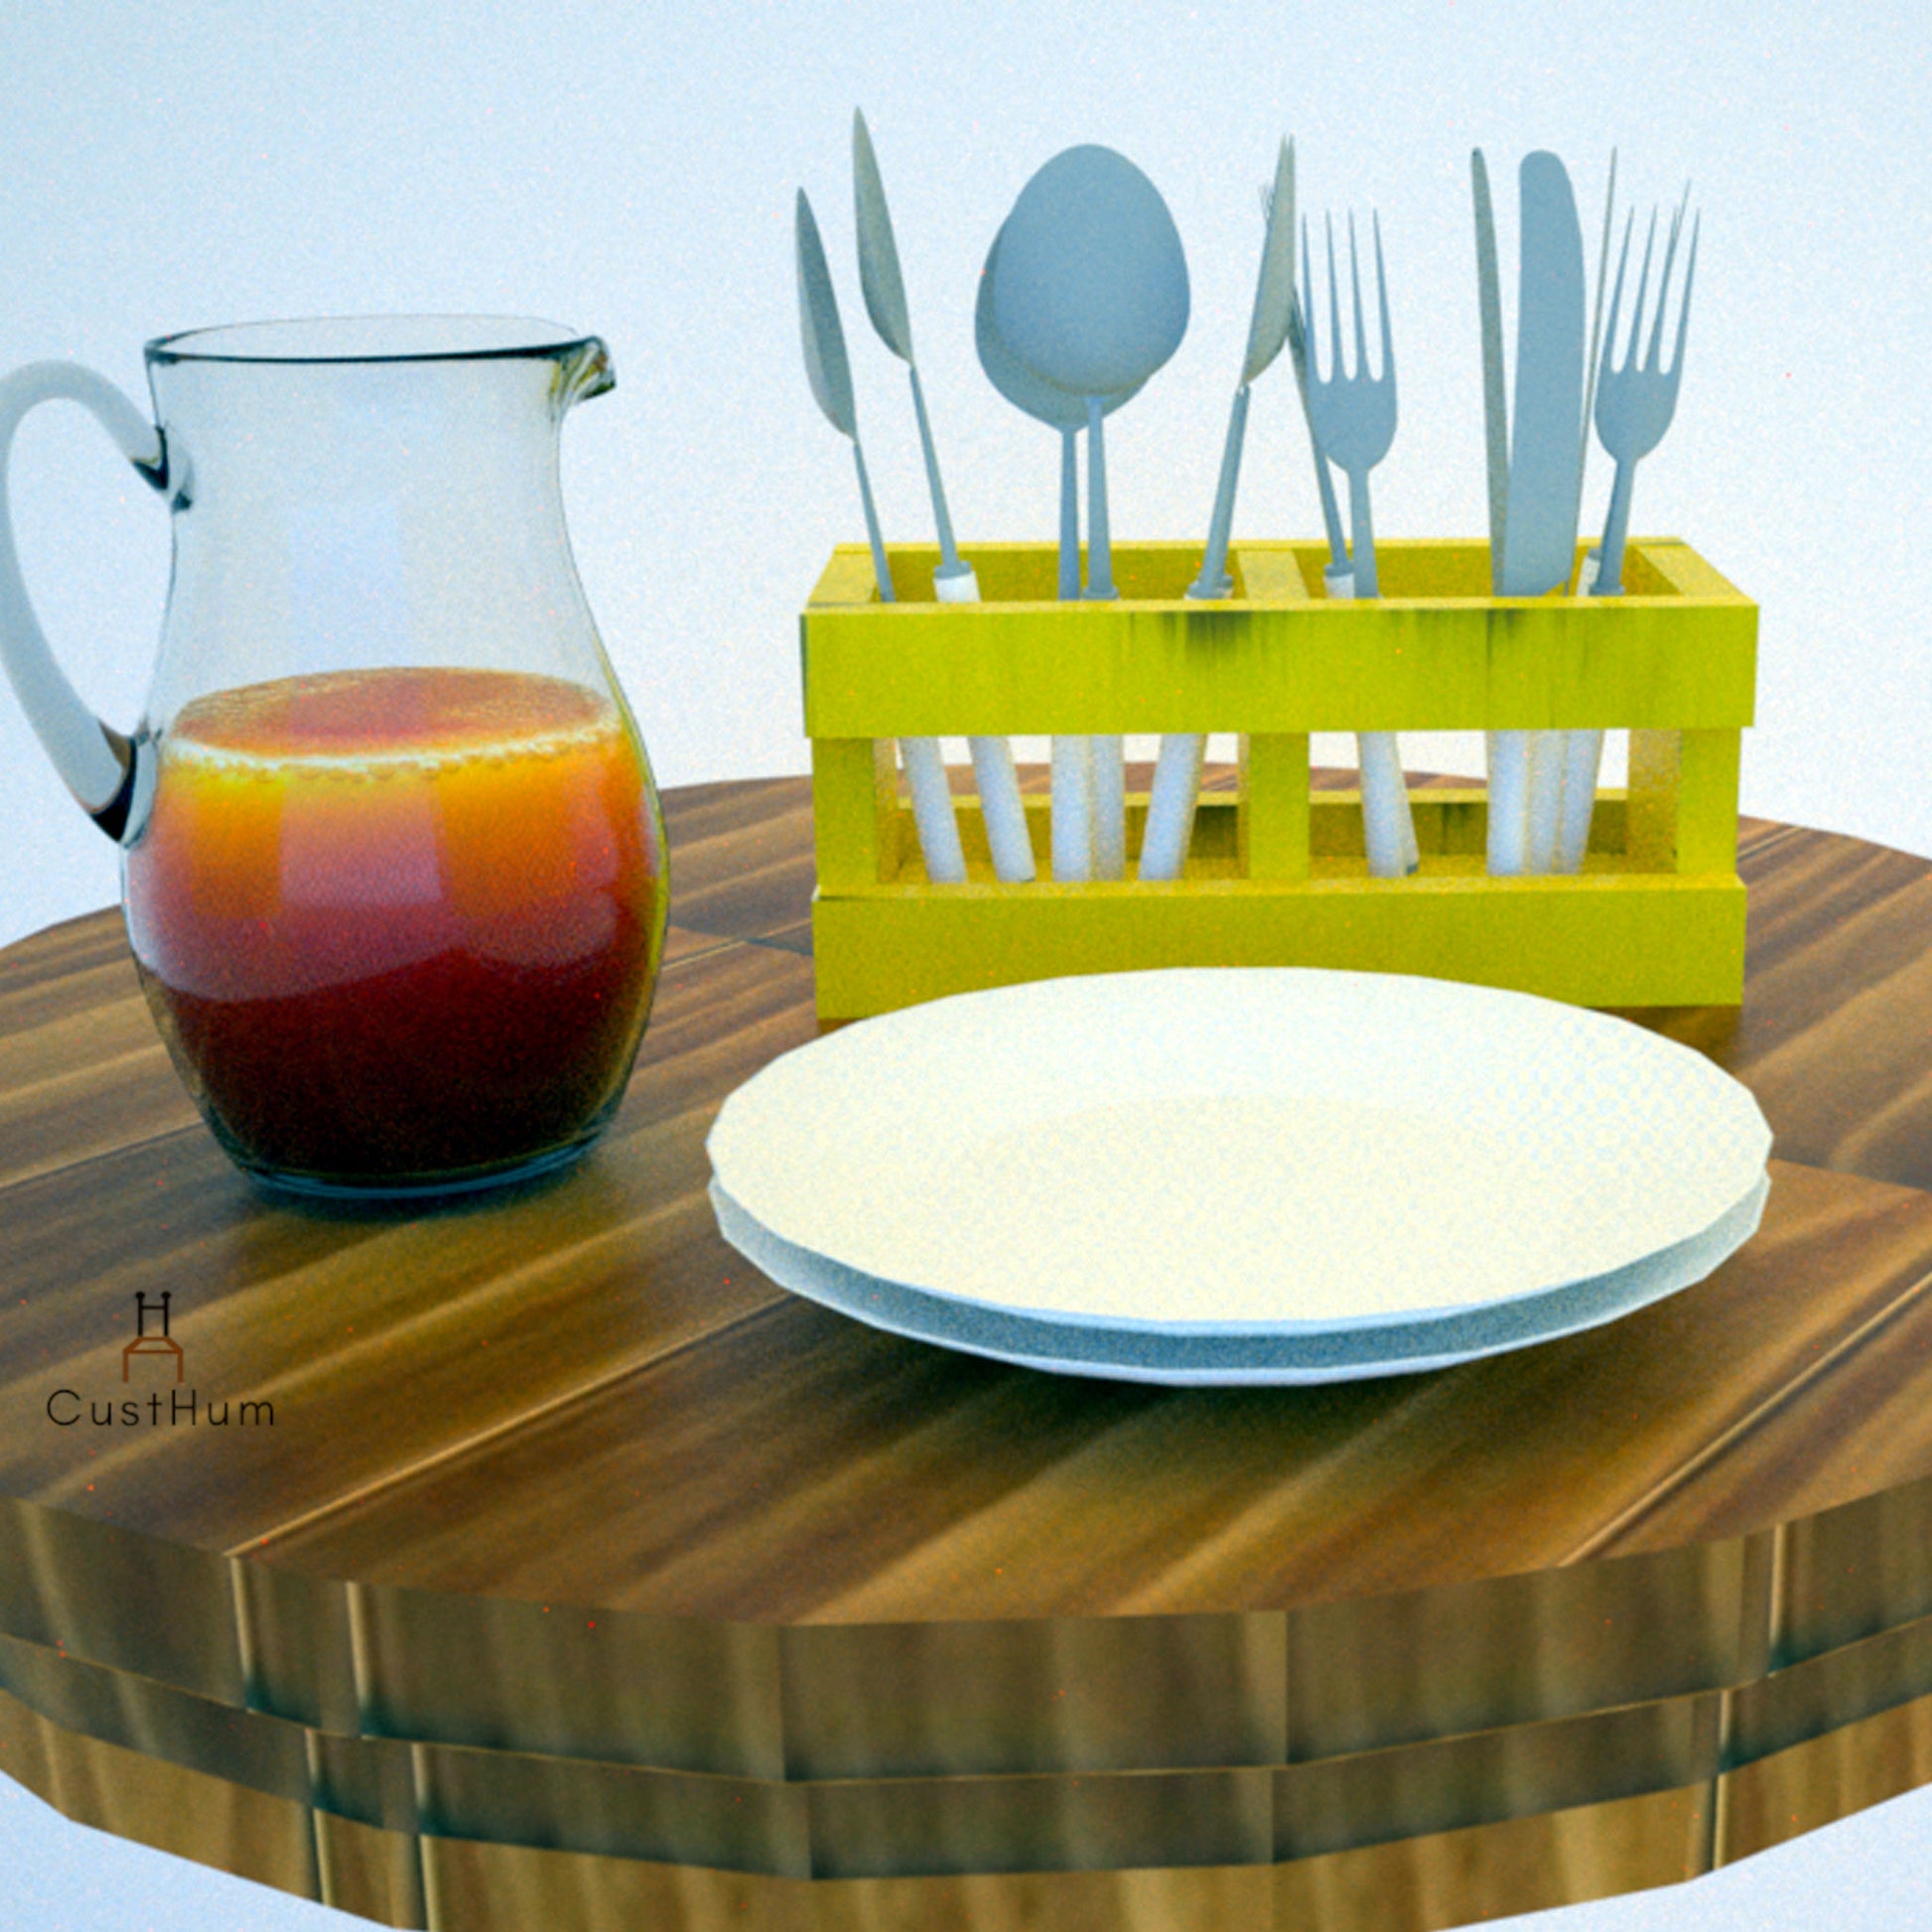 CustHum-Essen-wooden cutlery and condiments holder-distressed yellow with props